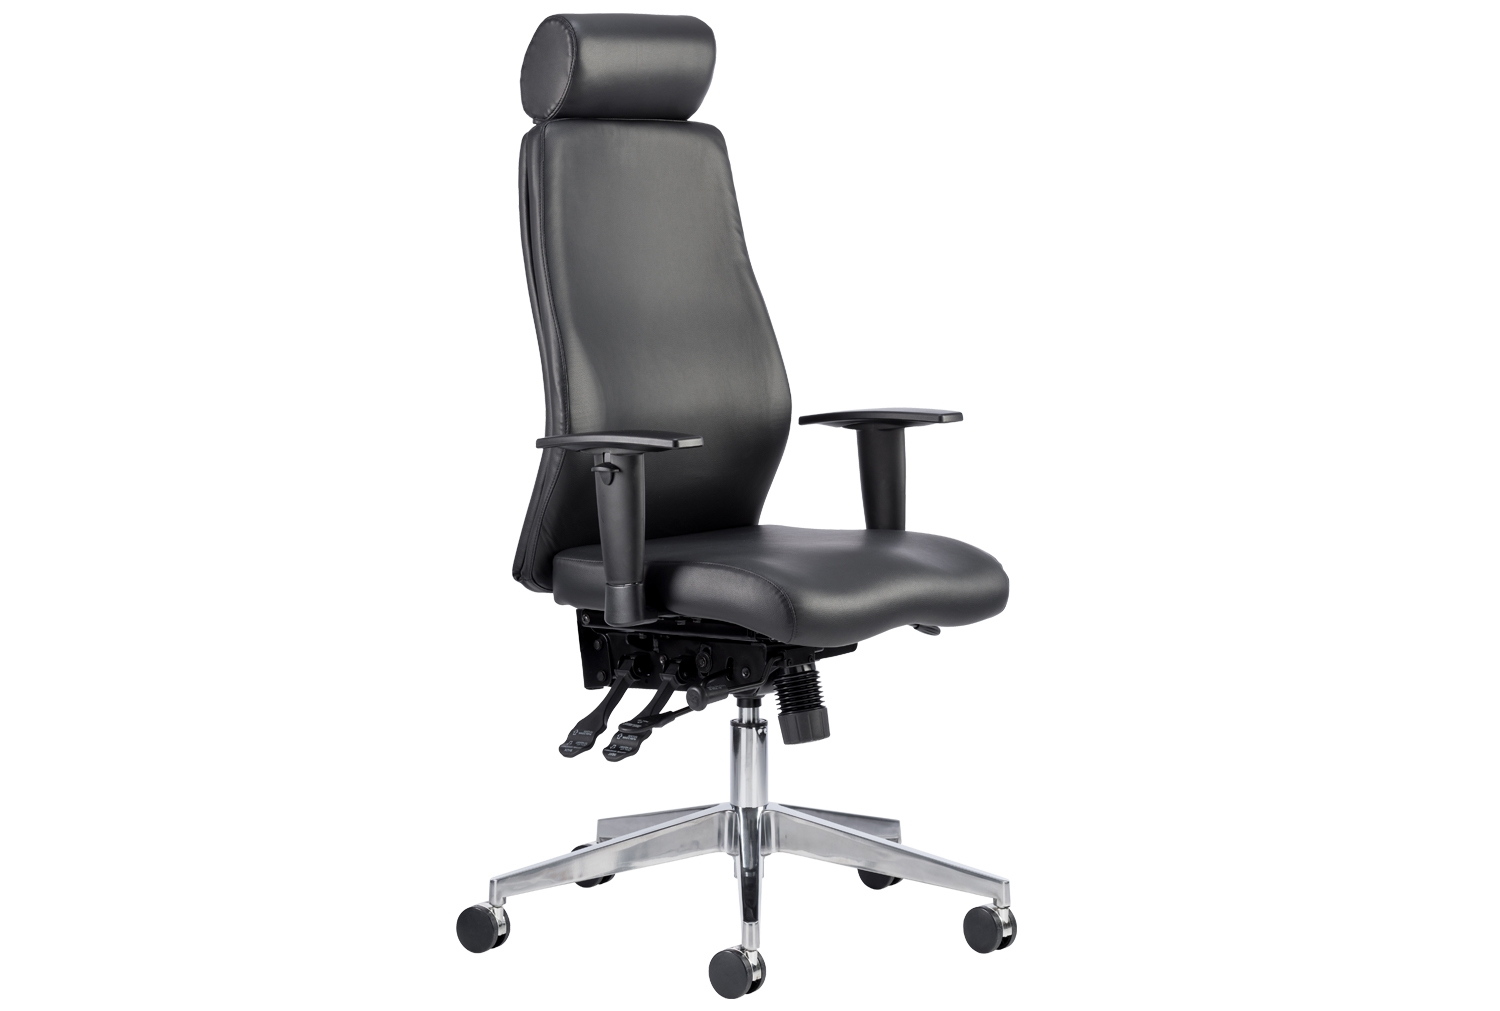 Brechin High Back Leather Faced Executive Office Chair With Headrest, Black